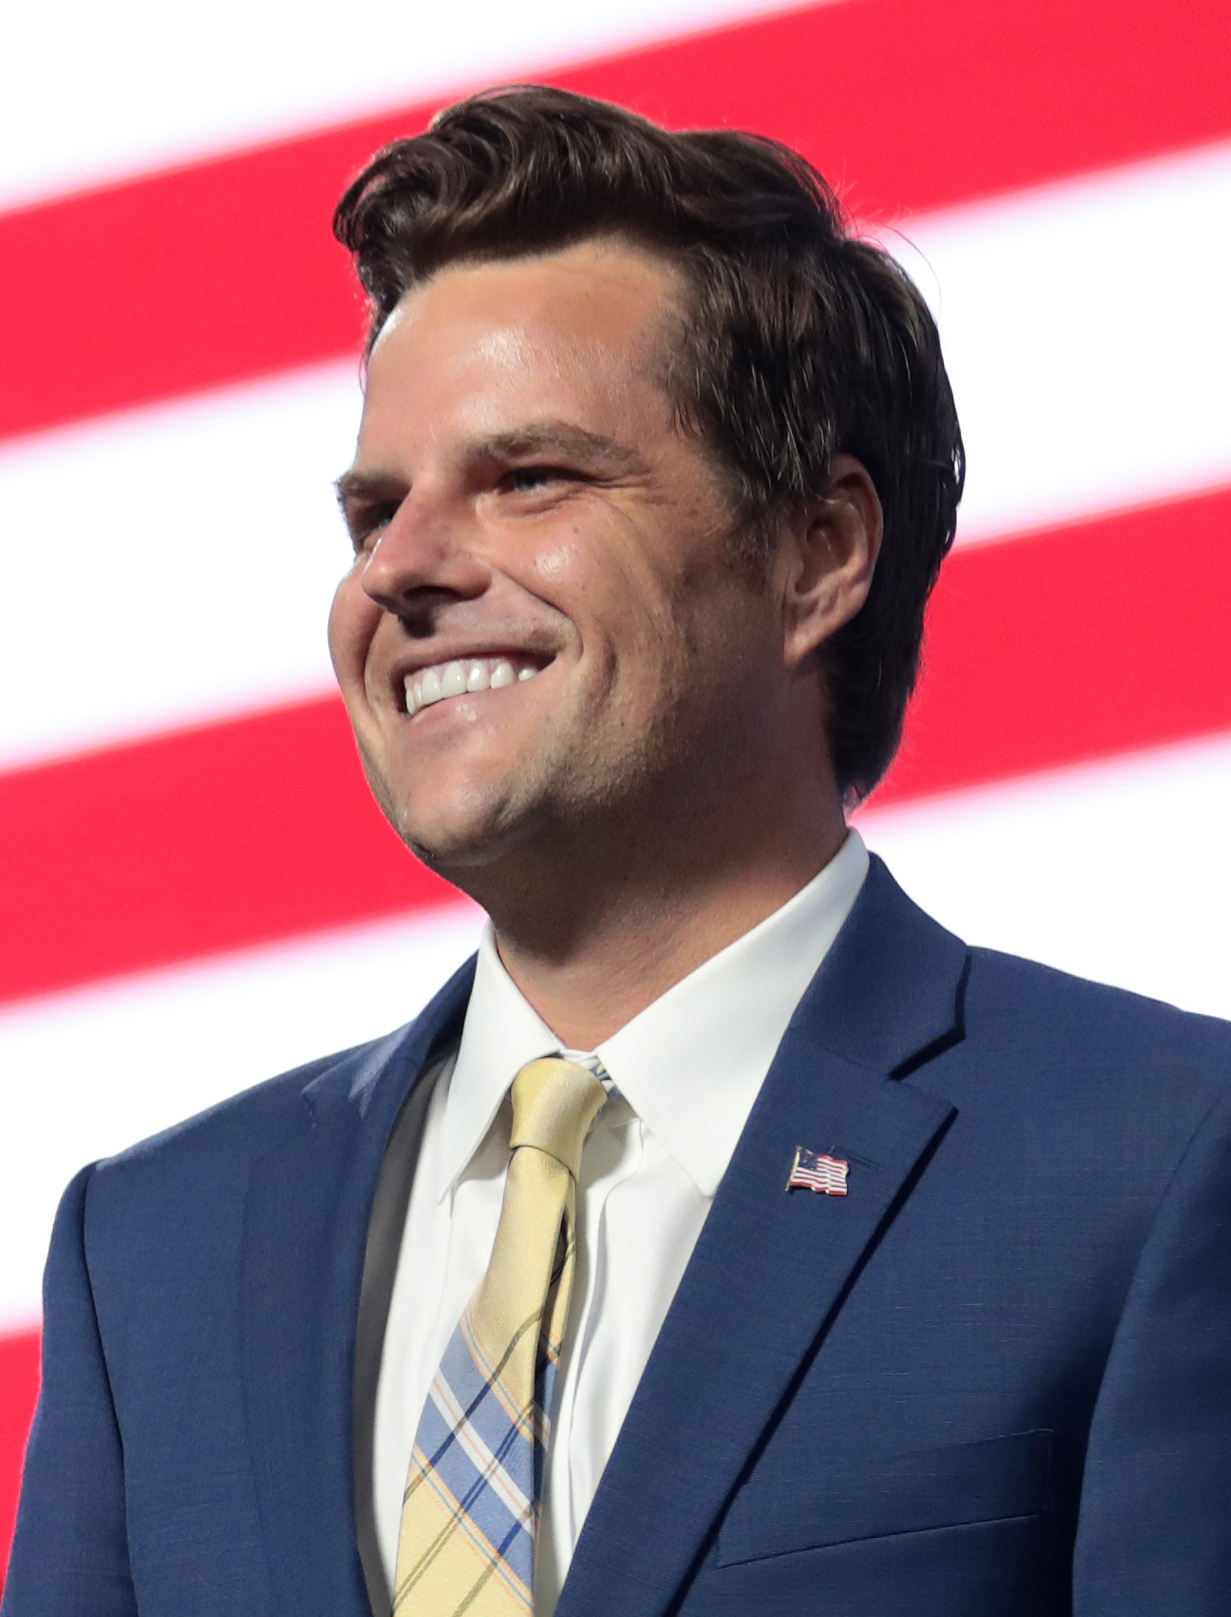 Gaetz Introduces Resolution To End U.S. Military And Financial Support For Ukraine – Pushes For Peace Agreement